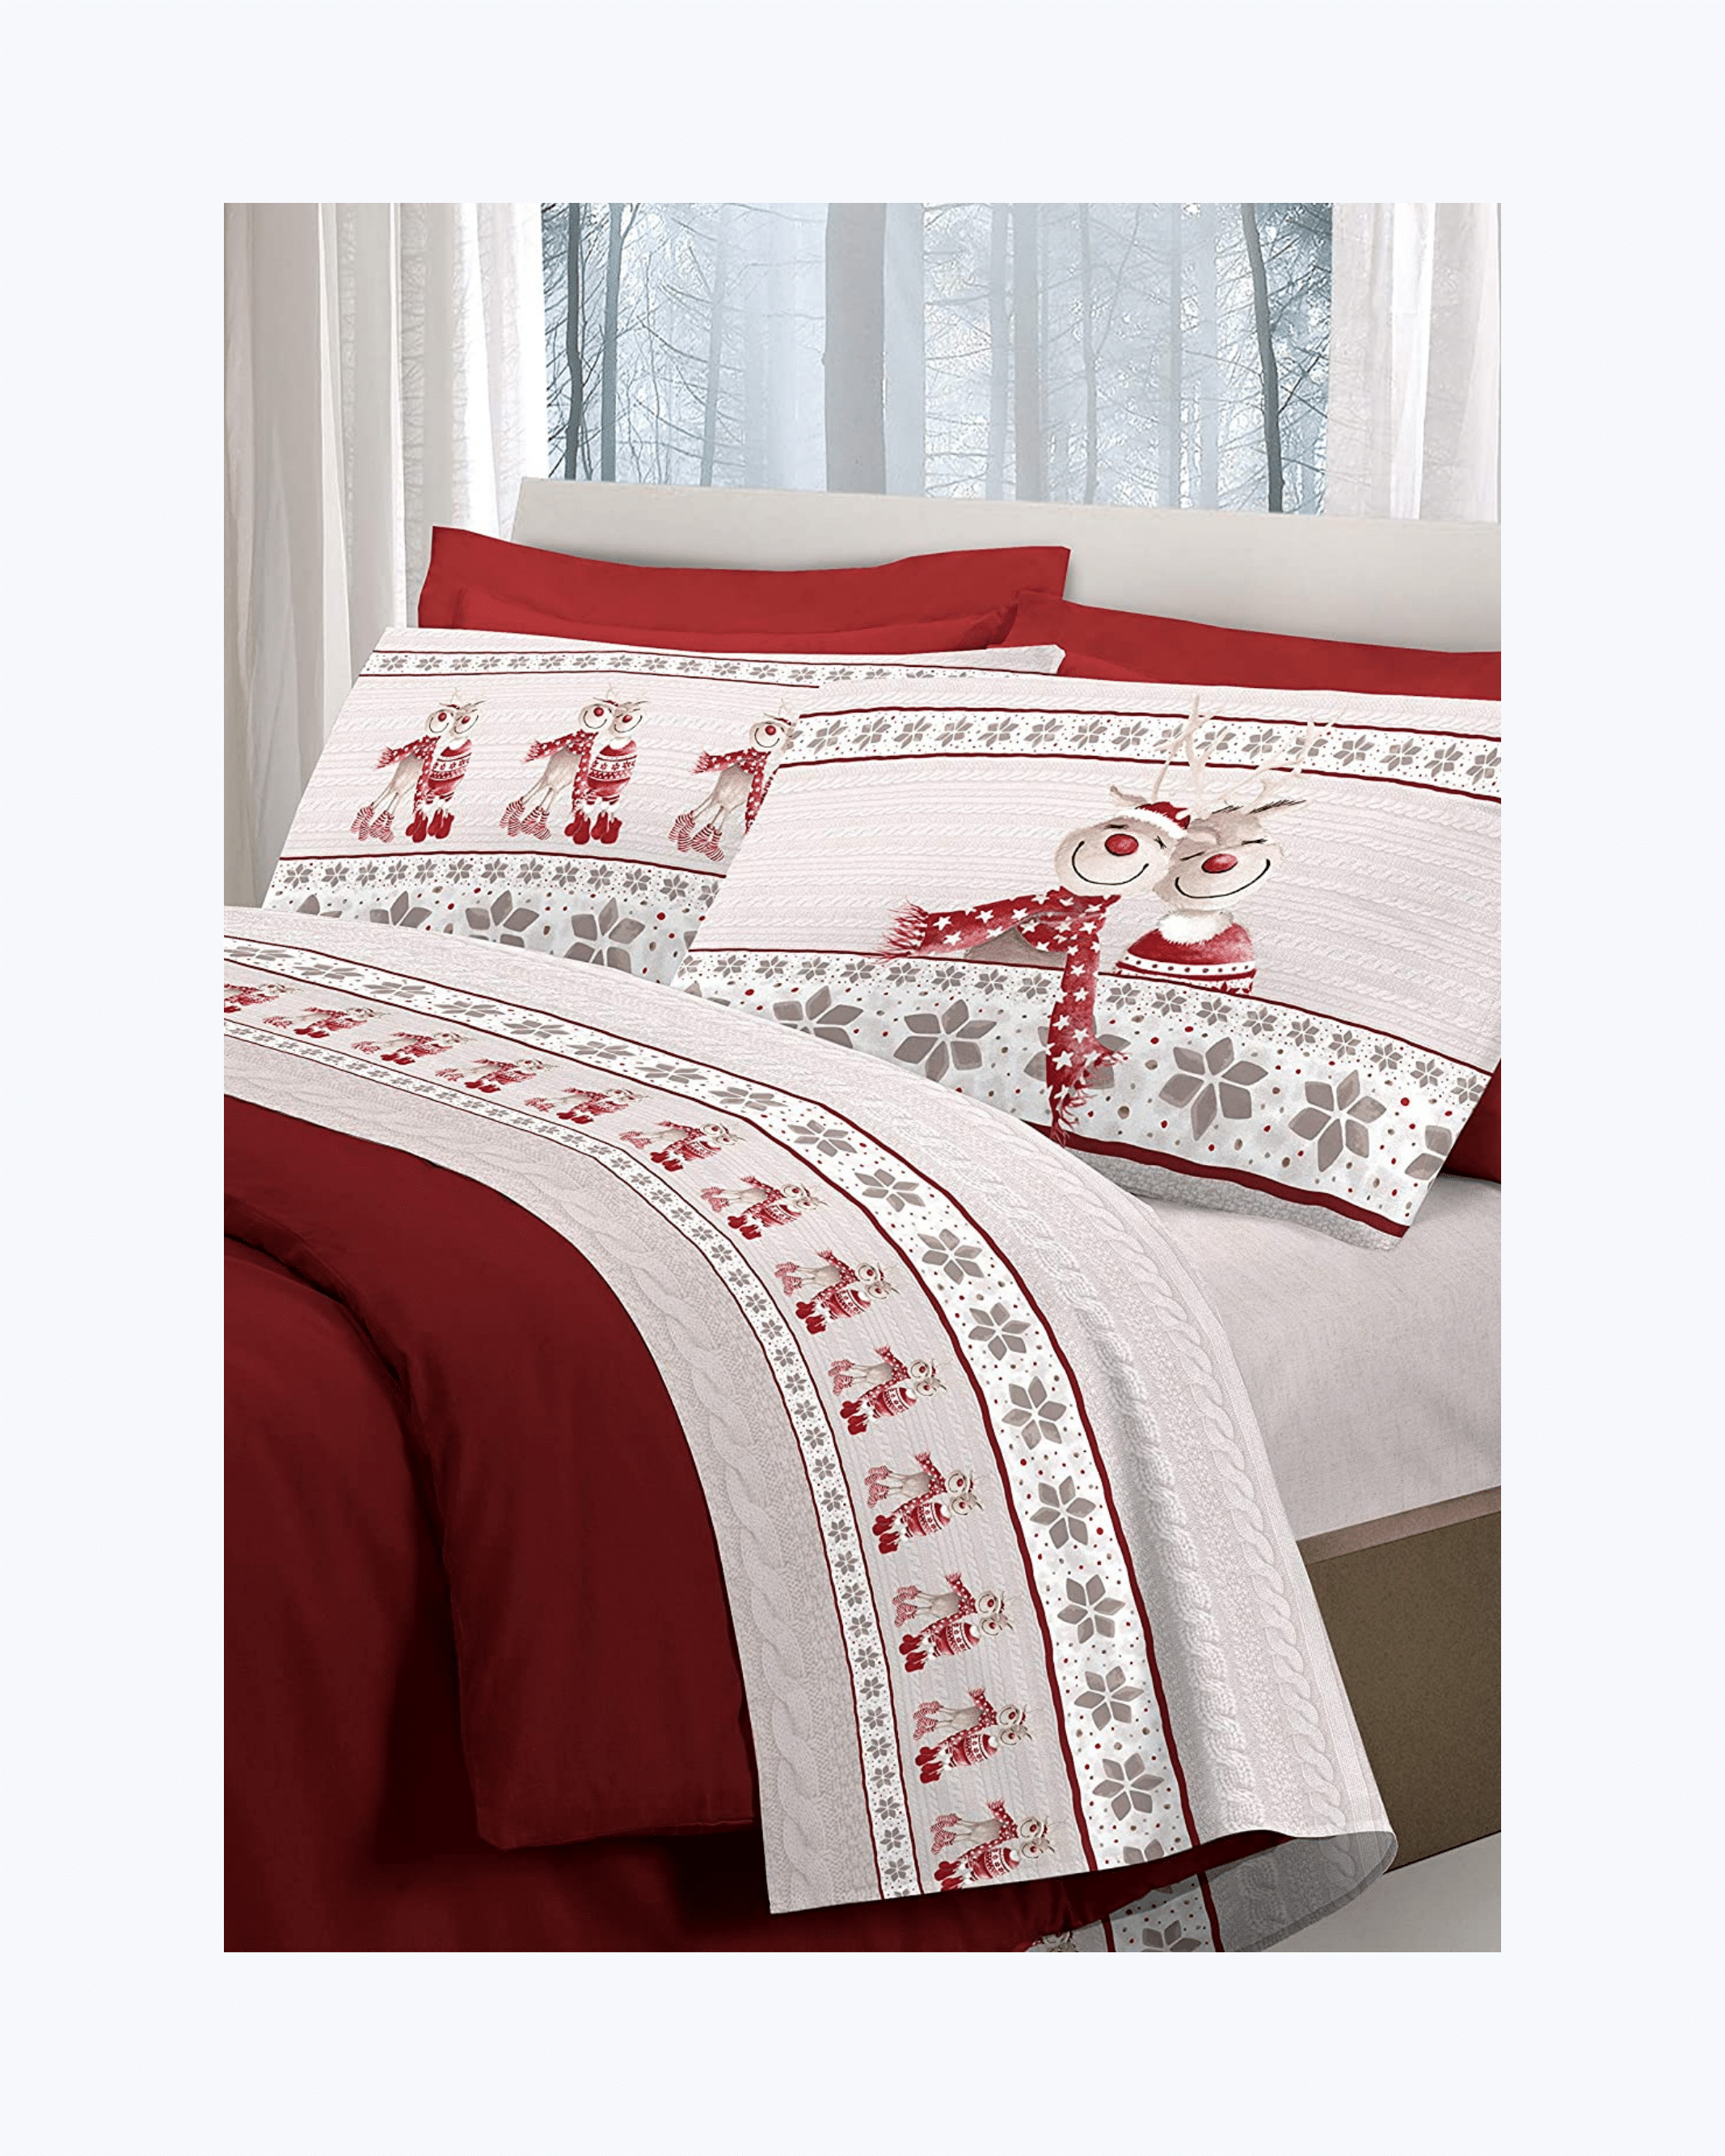 Set Lenzuola Letto in Cotone Made in Italy - Completo Letto Stampa Renna Rosso